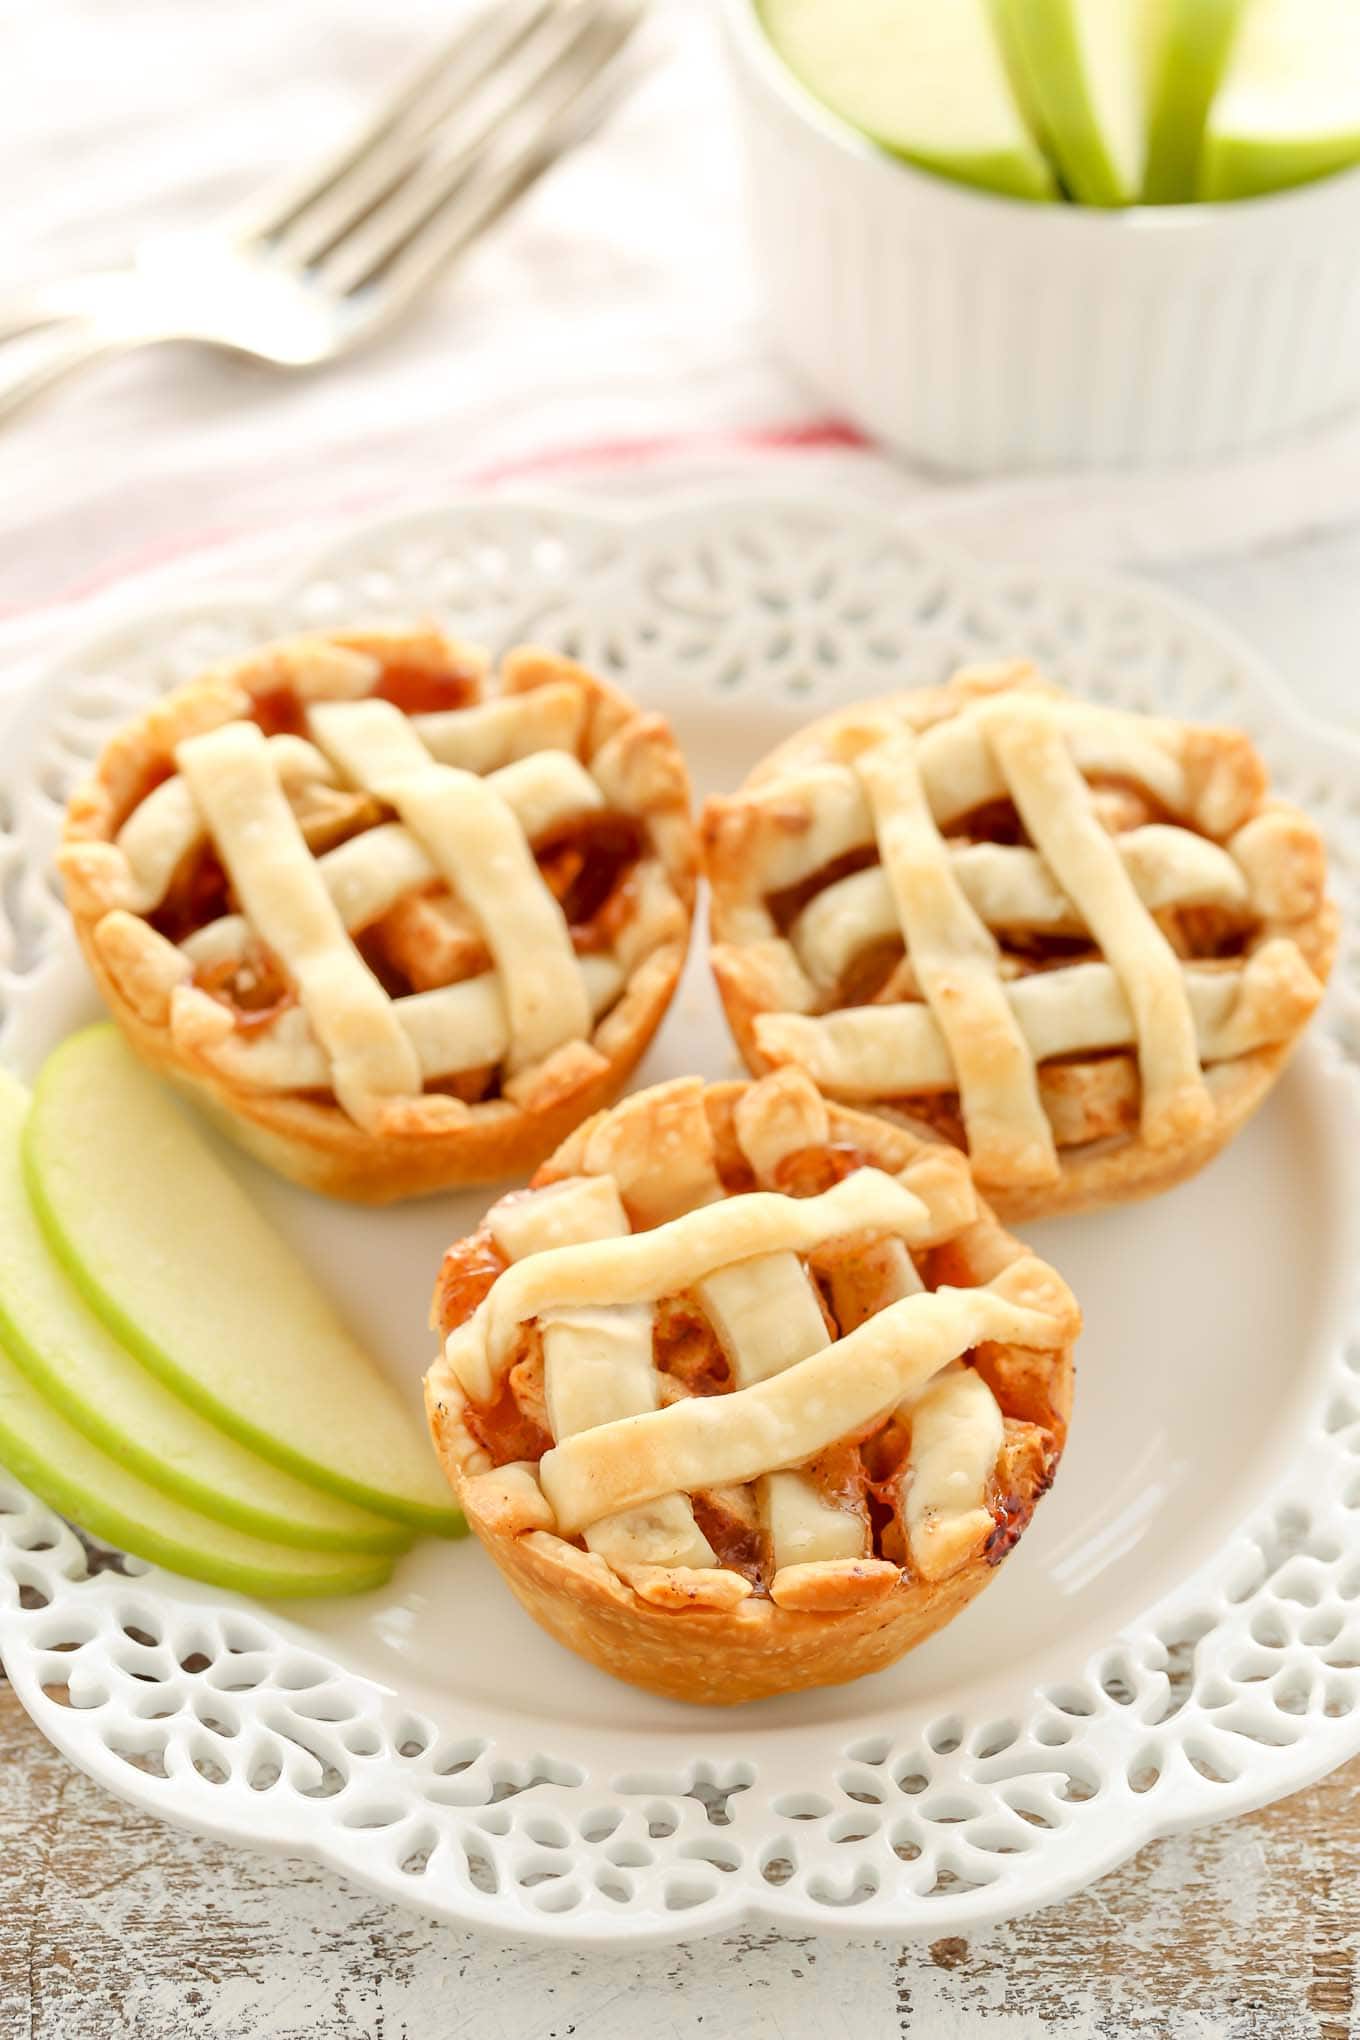 Three mini apple pies on a decorative white plate. A small container of sliced apples and a fork are in the background.